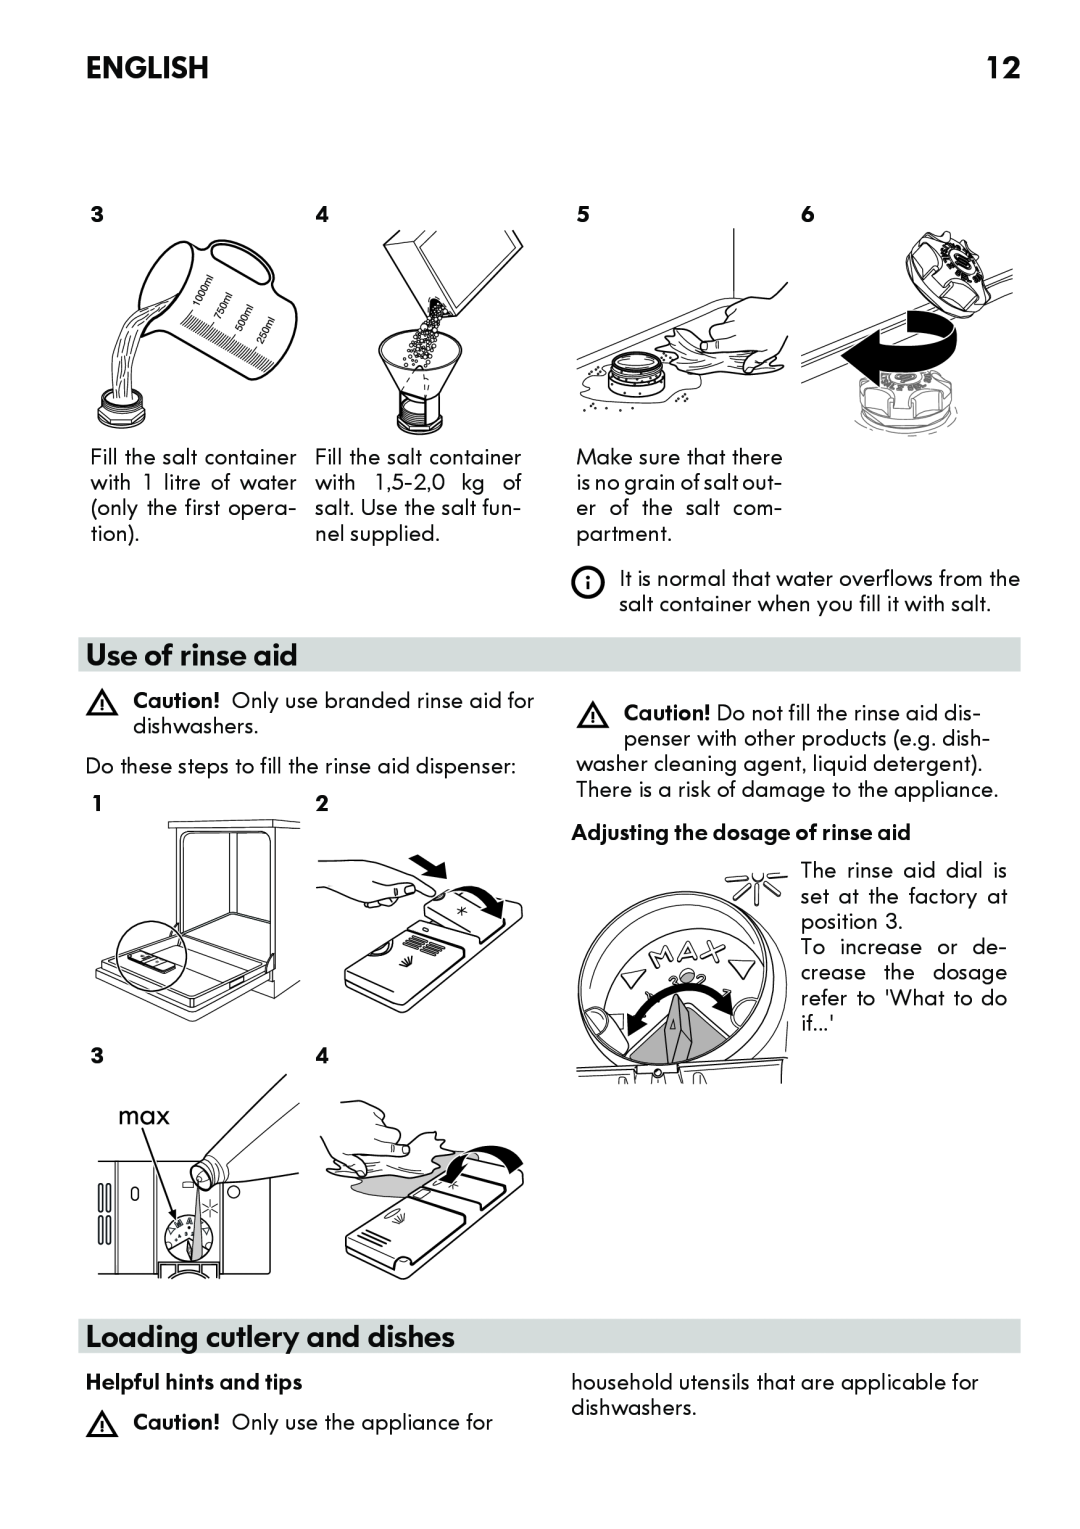 IKEA DW60 manual Use of rinse aid, Loading cutlery and dishes, English, Fill the salt container 